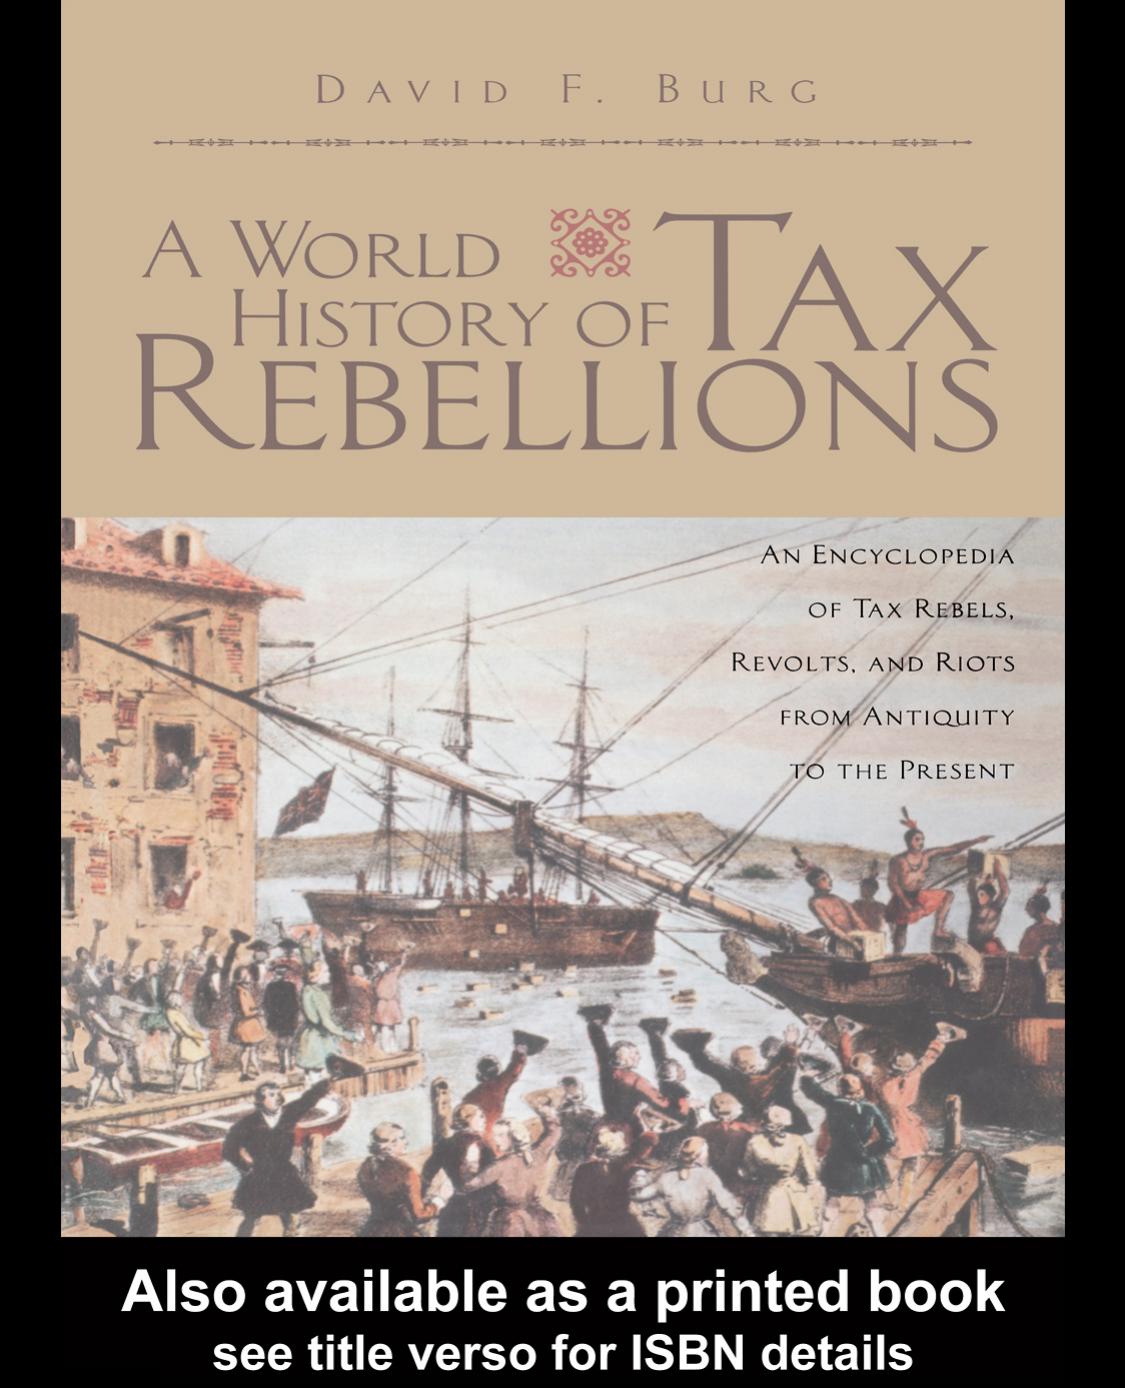 A World History of Tax Rebellions: An Encyclopedia of Tax Rebels, Revolts, and Riots From Antiquity to the Present